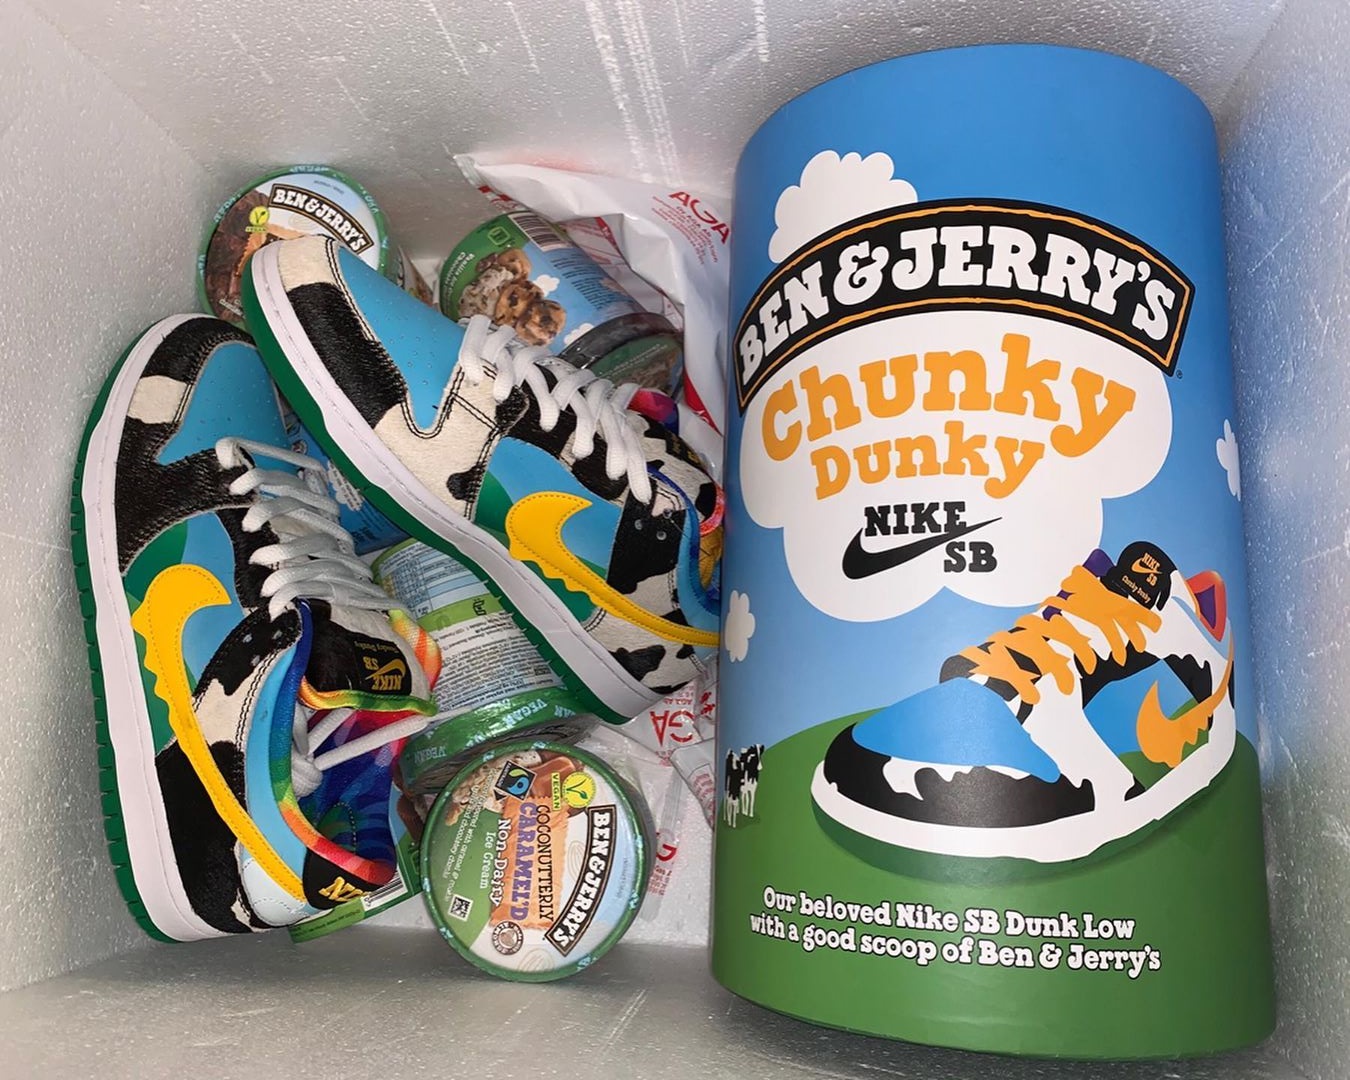 Nike Adds Allure To Chunky Dunky Dunk With Friends And Family Ice Cream